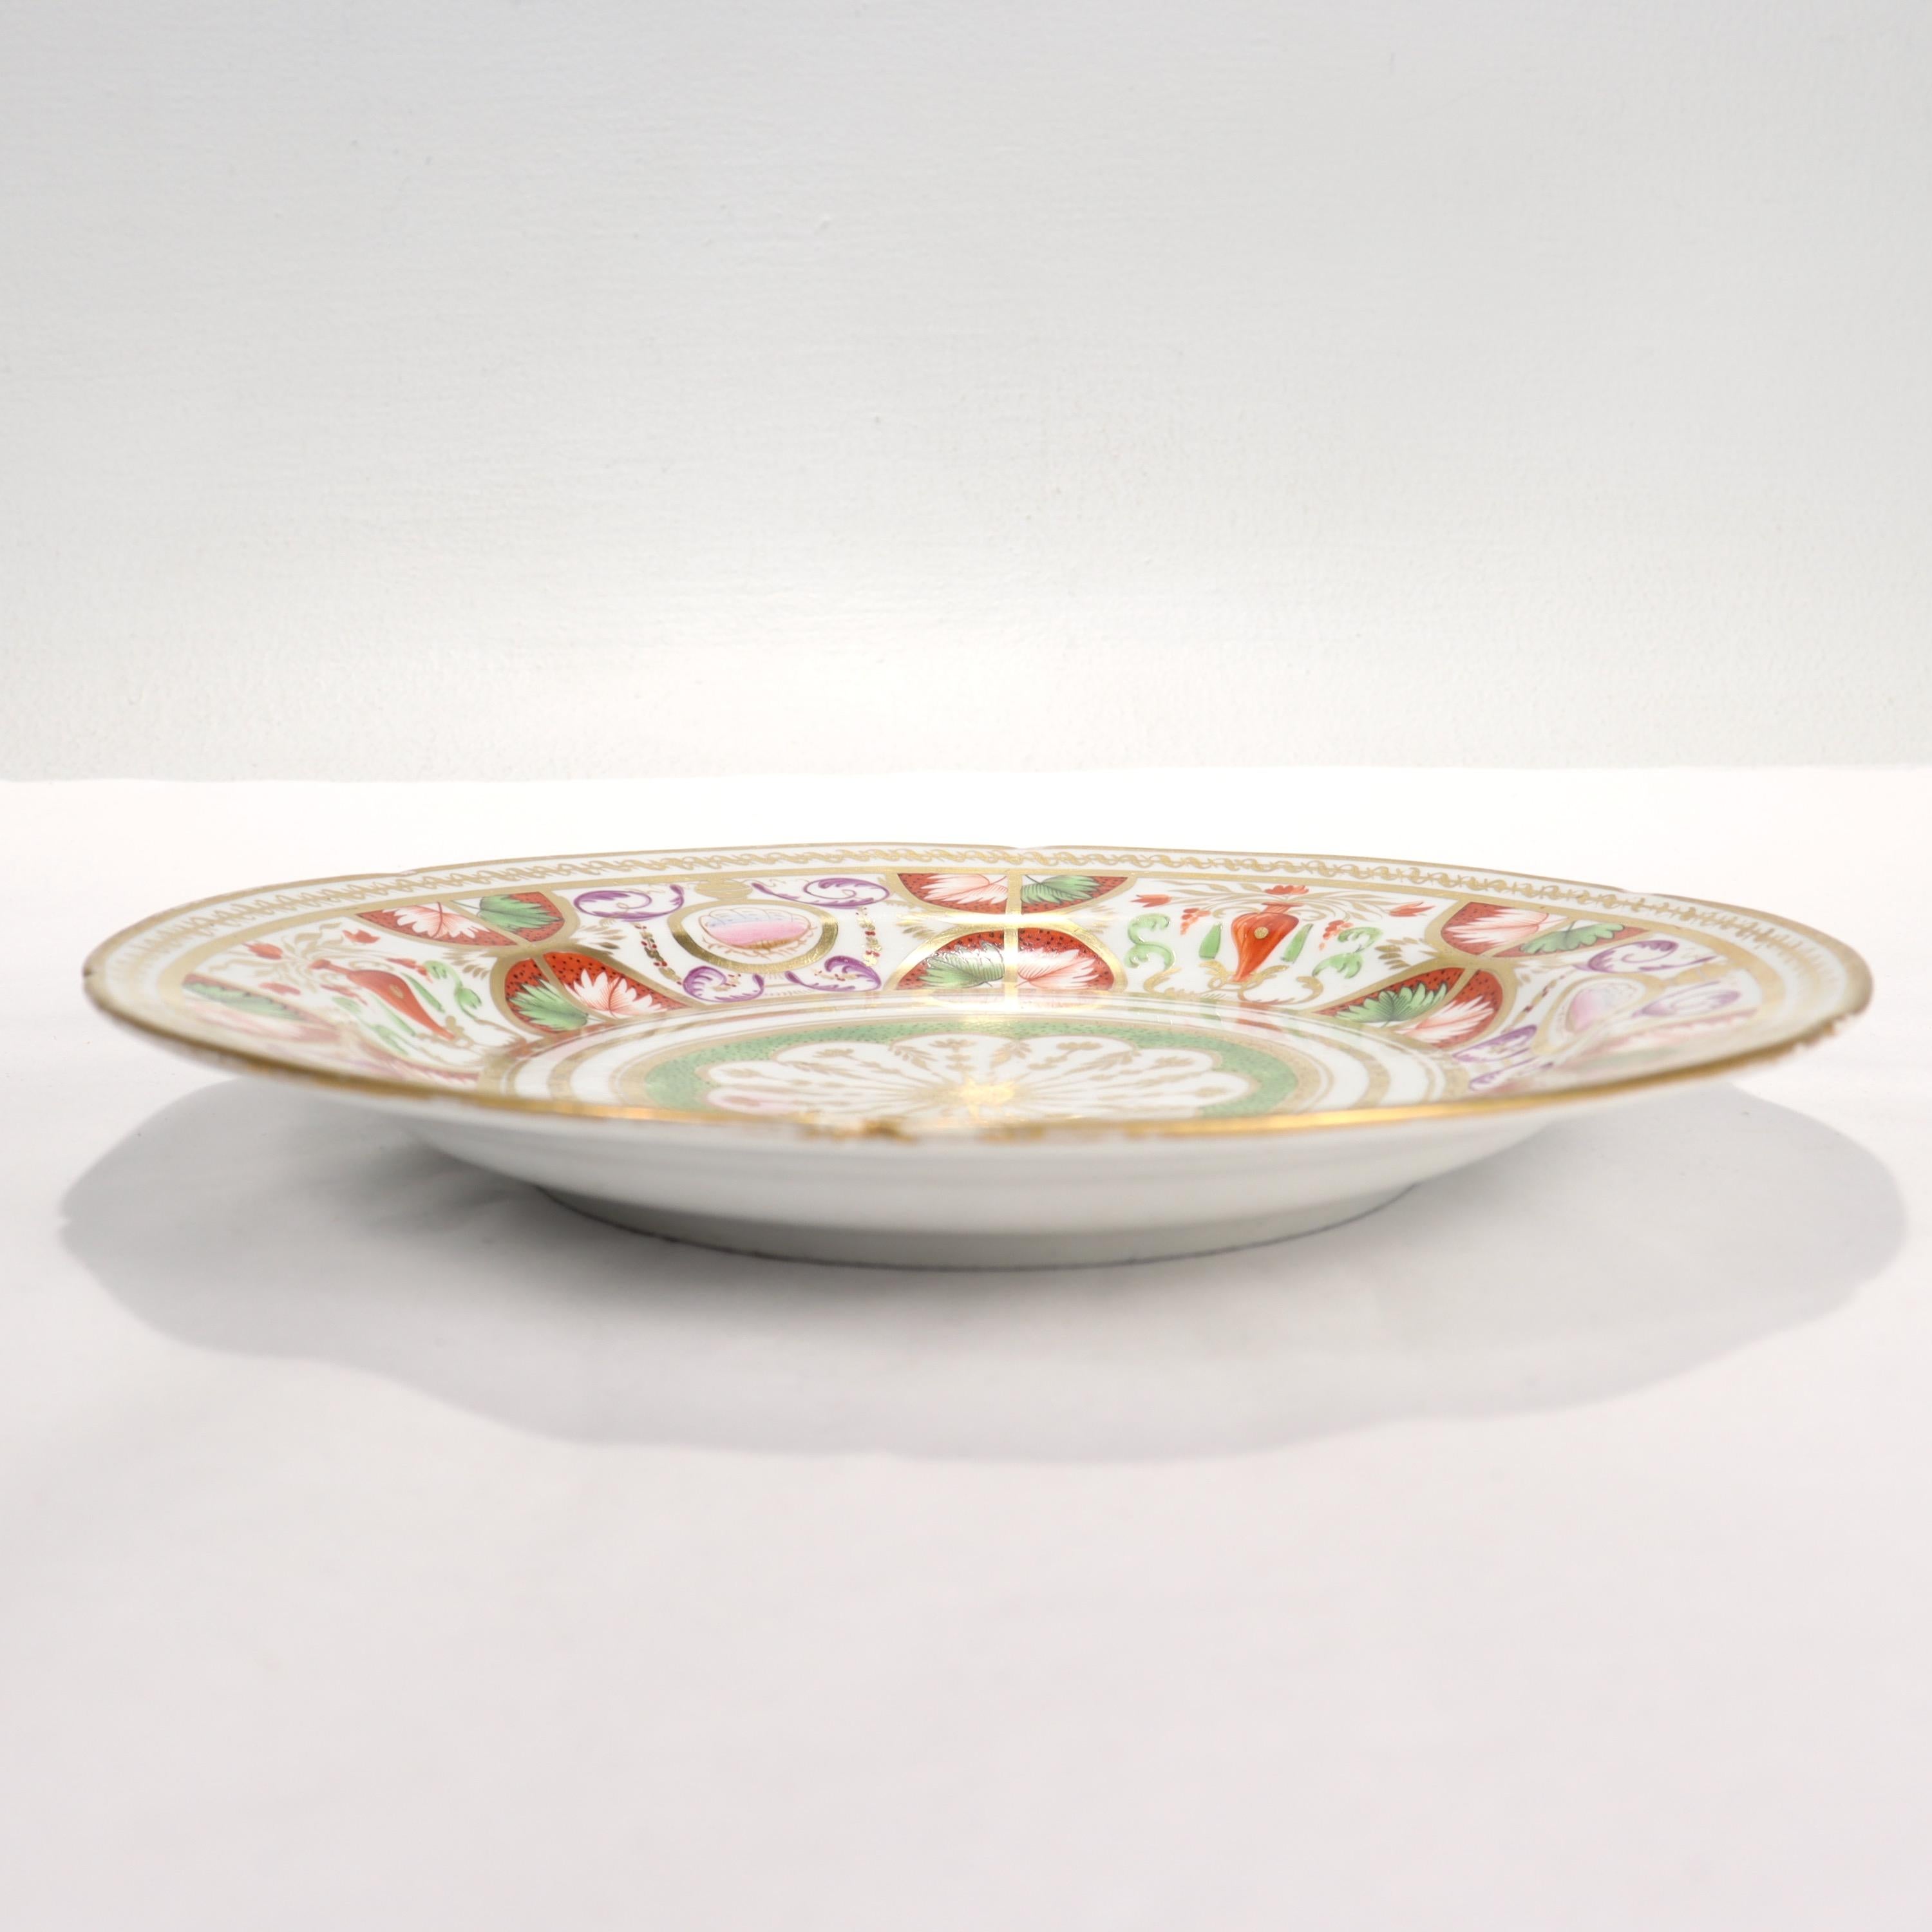 19th Century Antique English Neoclassical Porcelain Plate attributed to Coalport For Sale